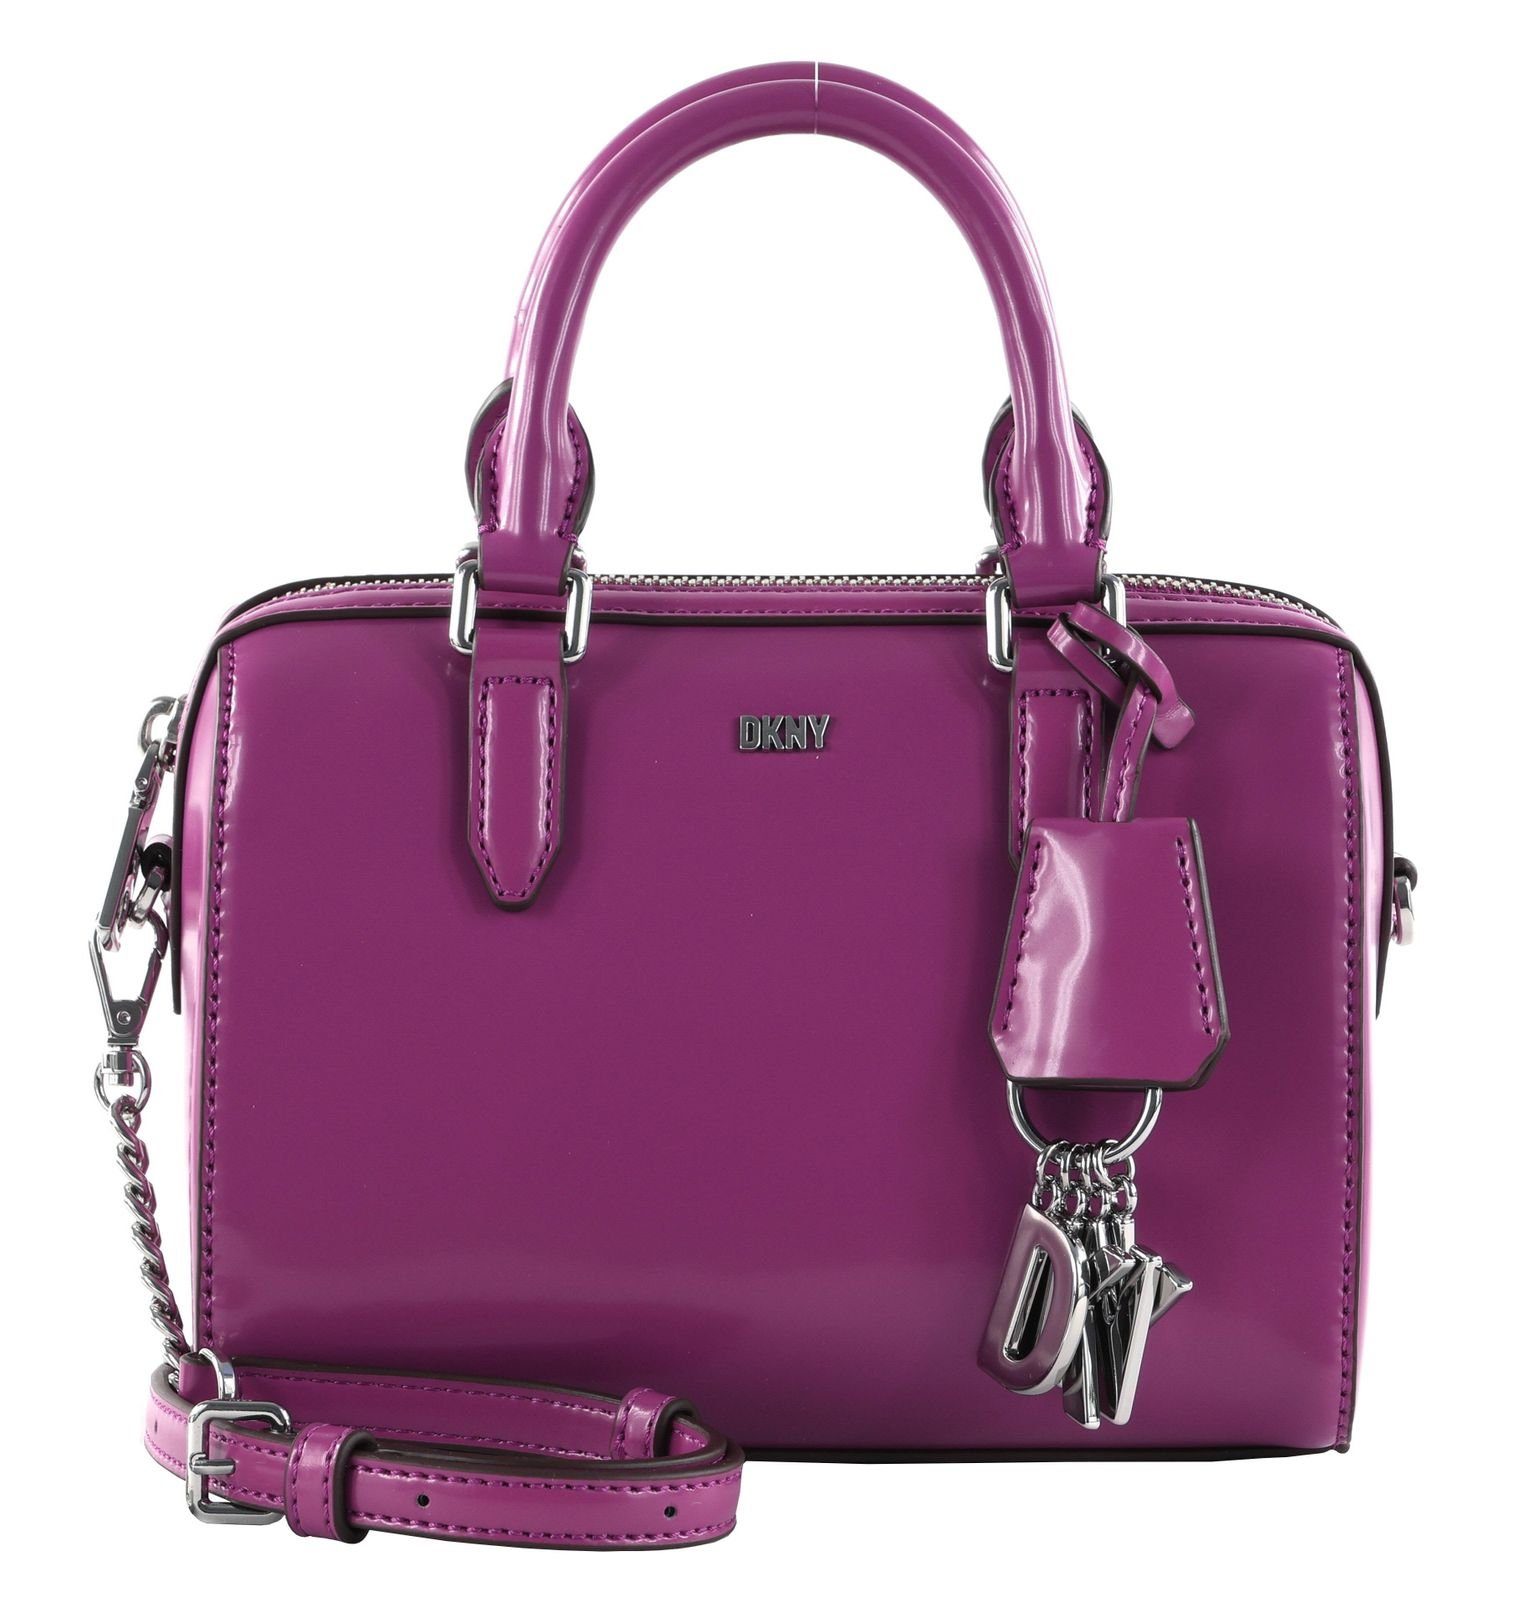 DKNY Handtasche Paige DK Orchid